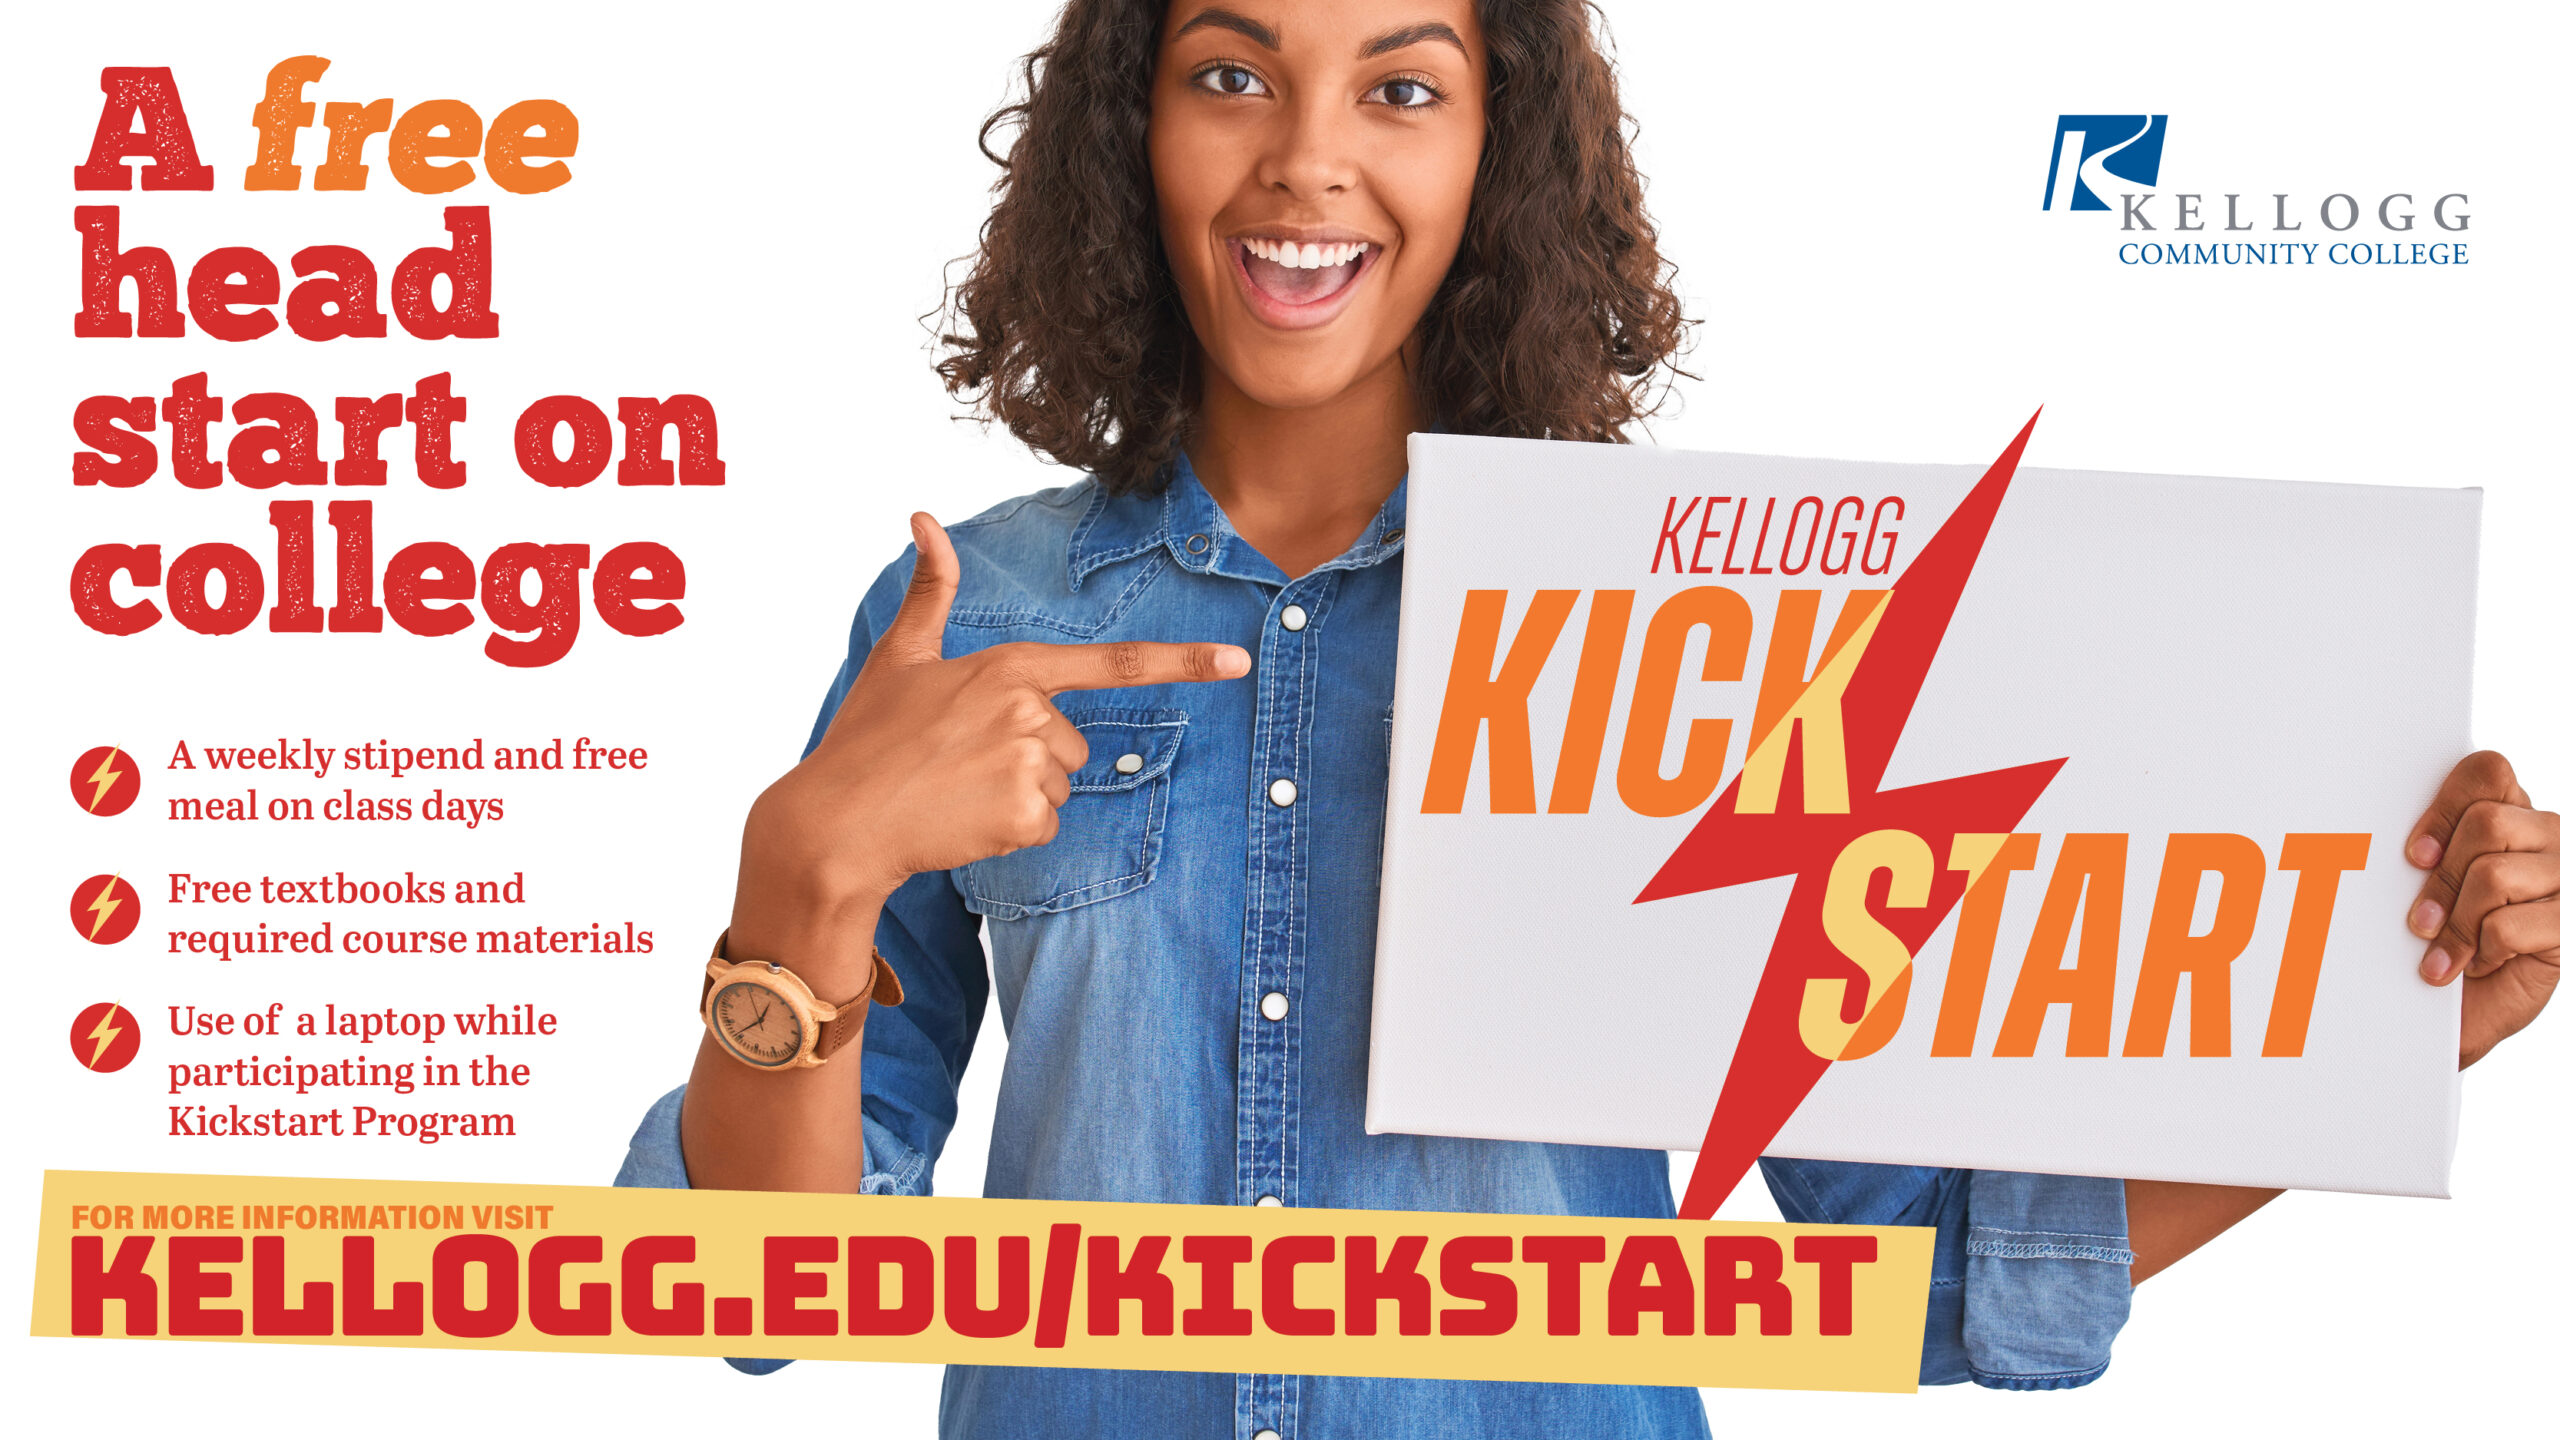 A girl smiles on a text graphic while holding a sign that says, "Kellogg Kickstart."